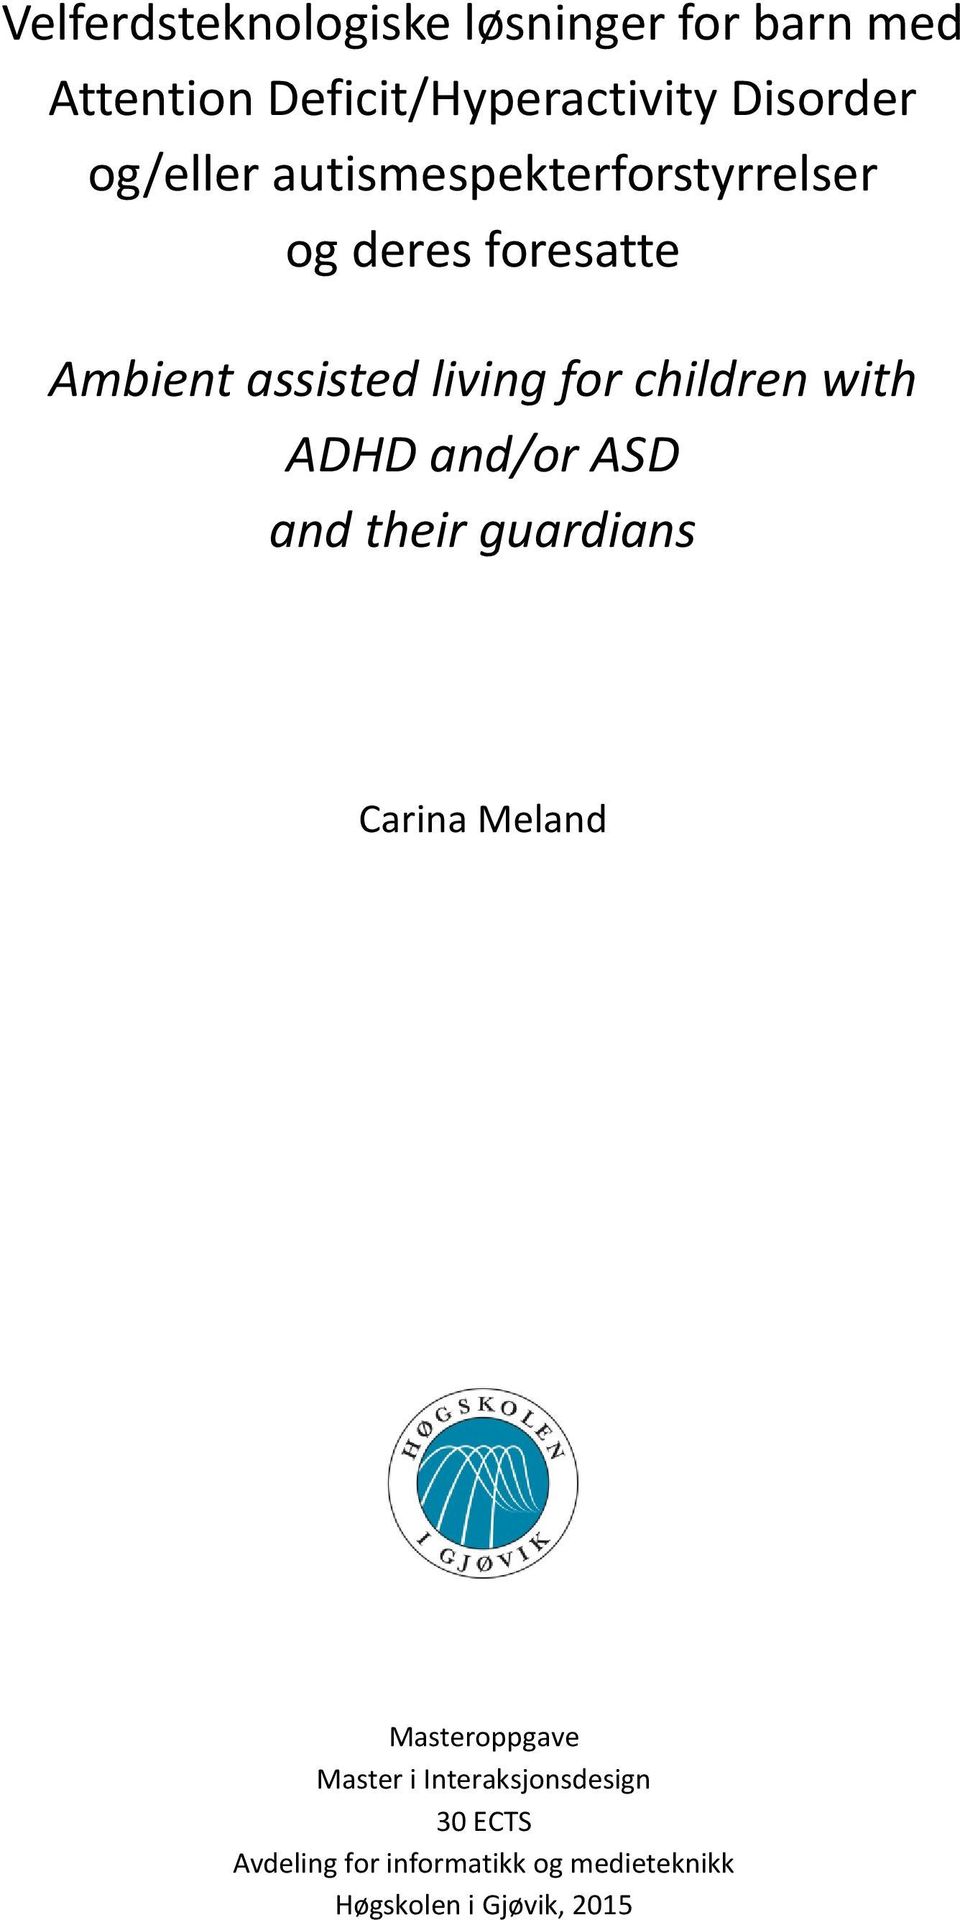 children with ADHD and/or ASD and their guardians Carina Meland Masteroppgave Master i